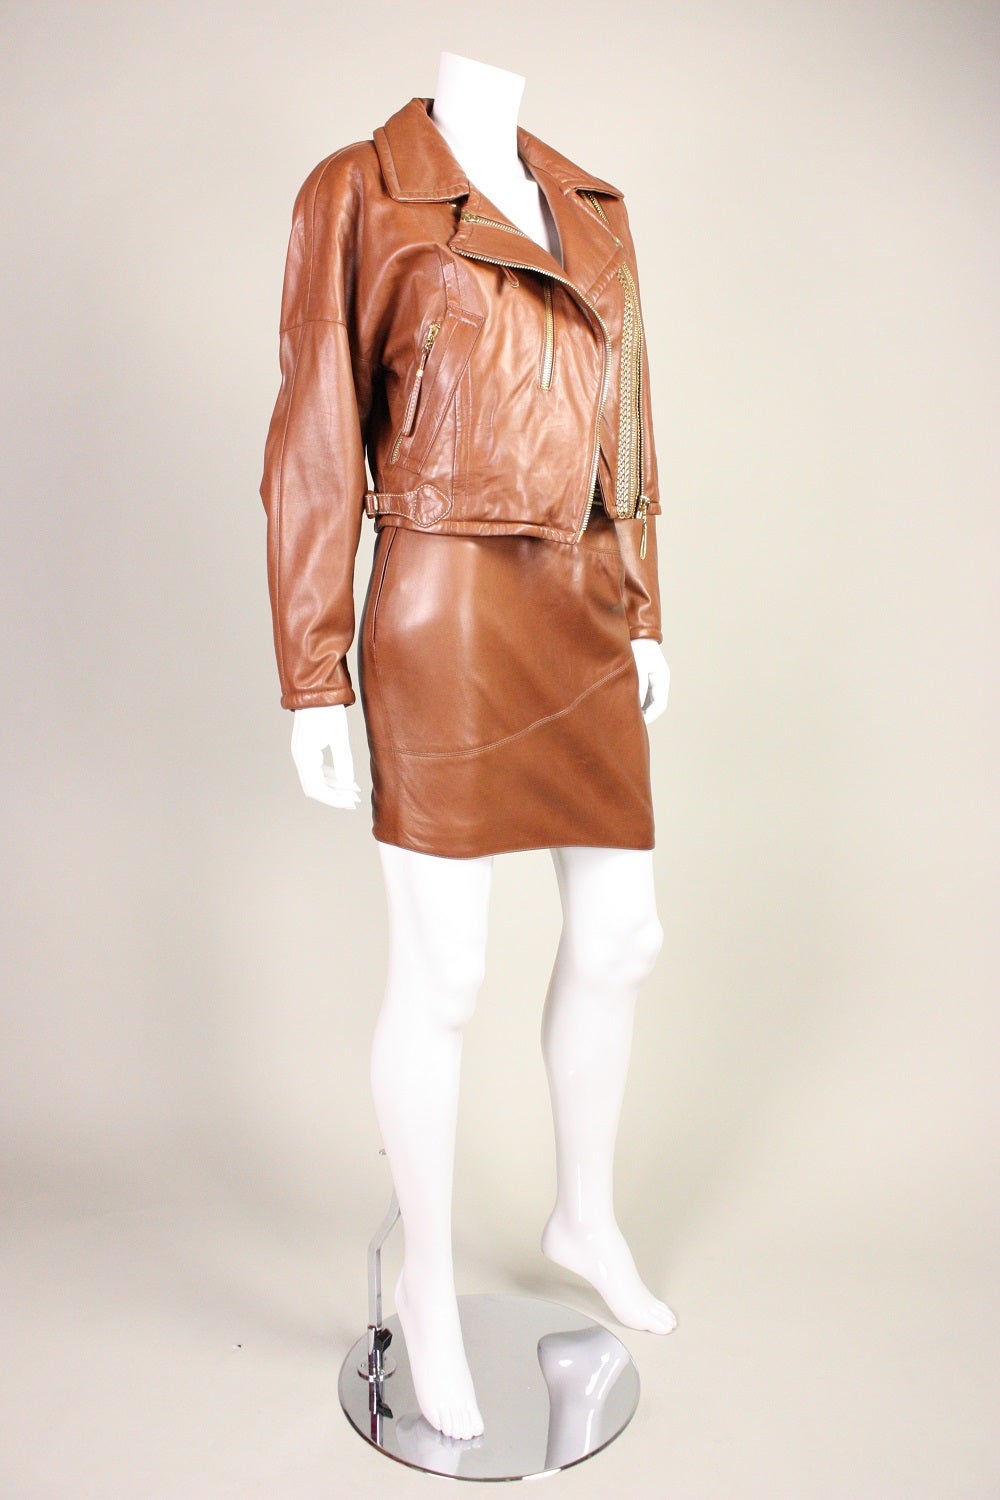 Fabulous suit from Gianfranco Ferre is made of buttery soft brown leather and features gold-toned hardware.  Both pieces are lined and have zippered closures.

No size label, but we estimate it would fit a size